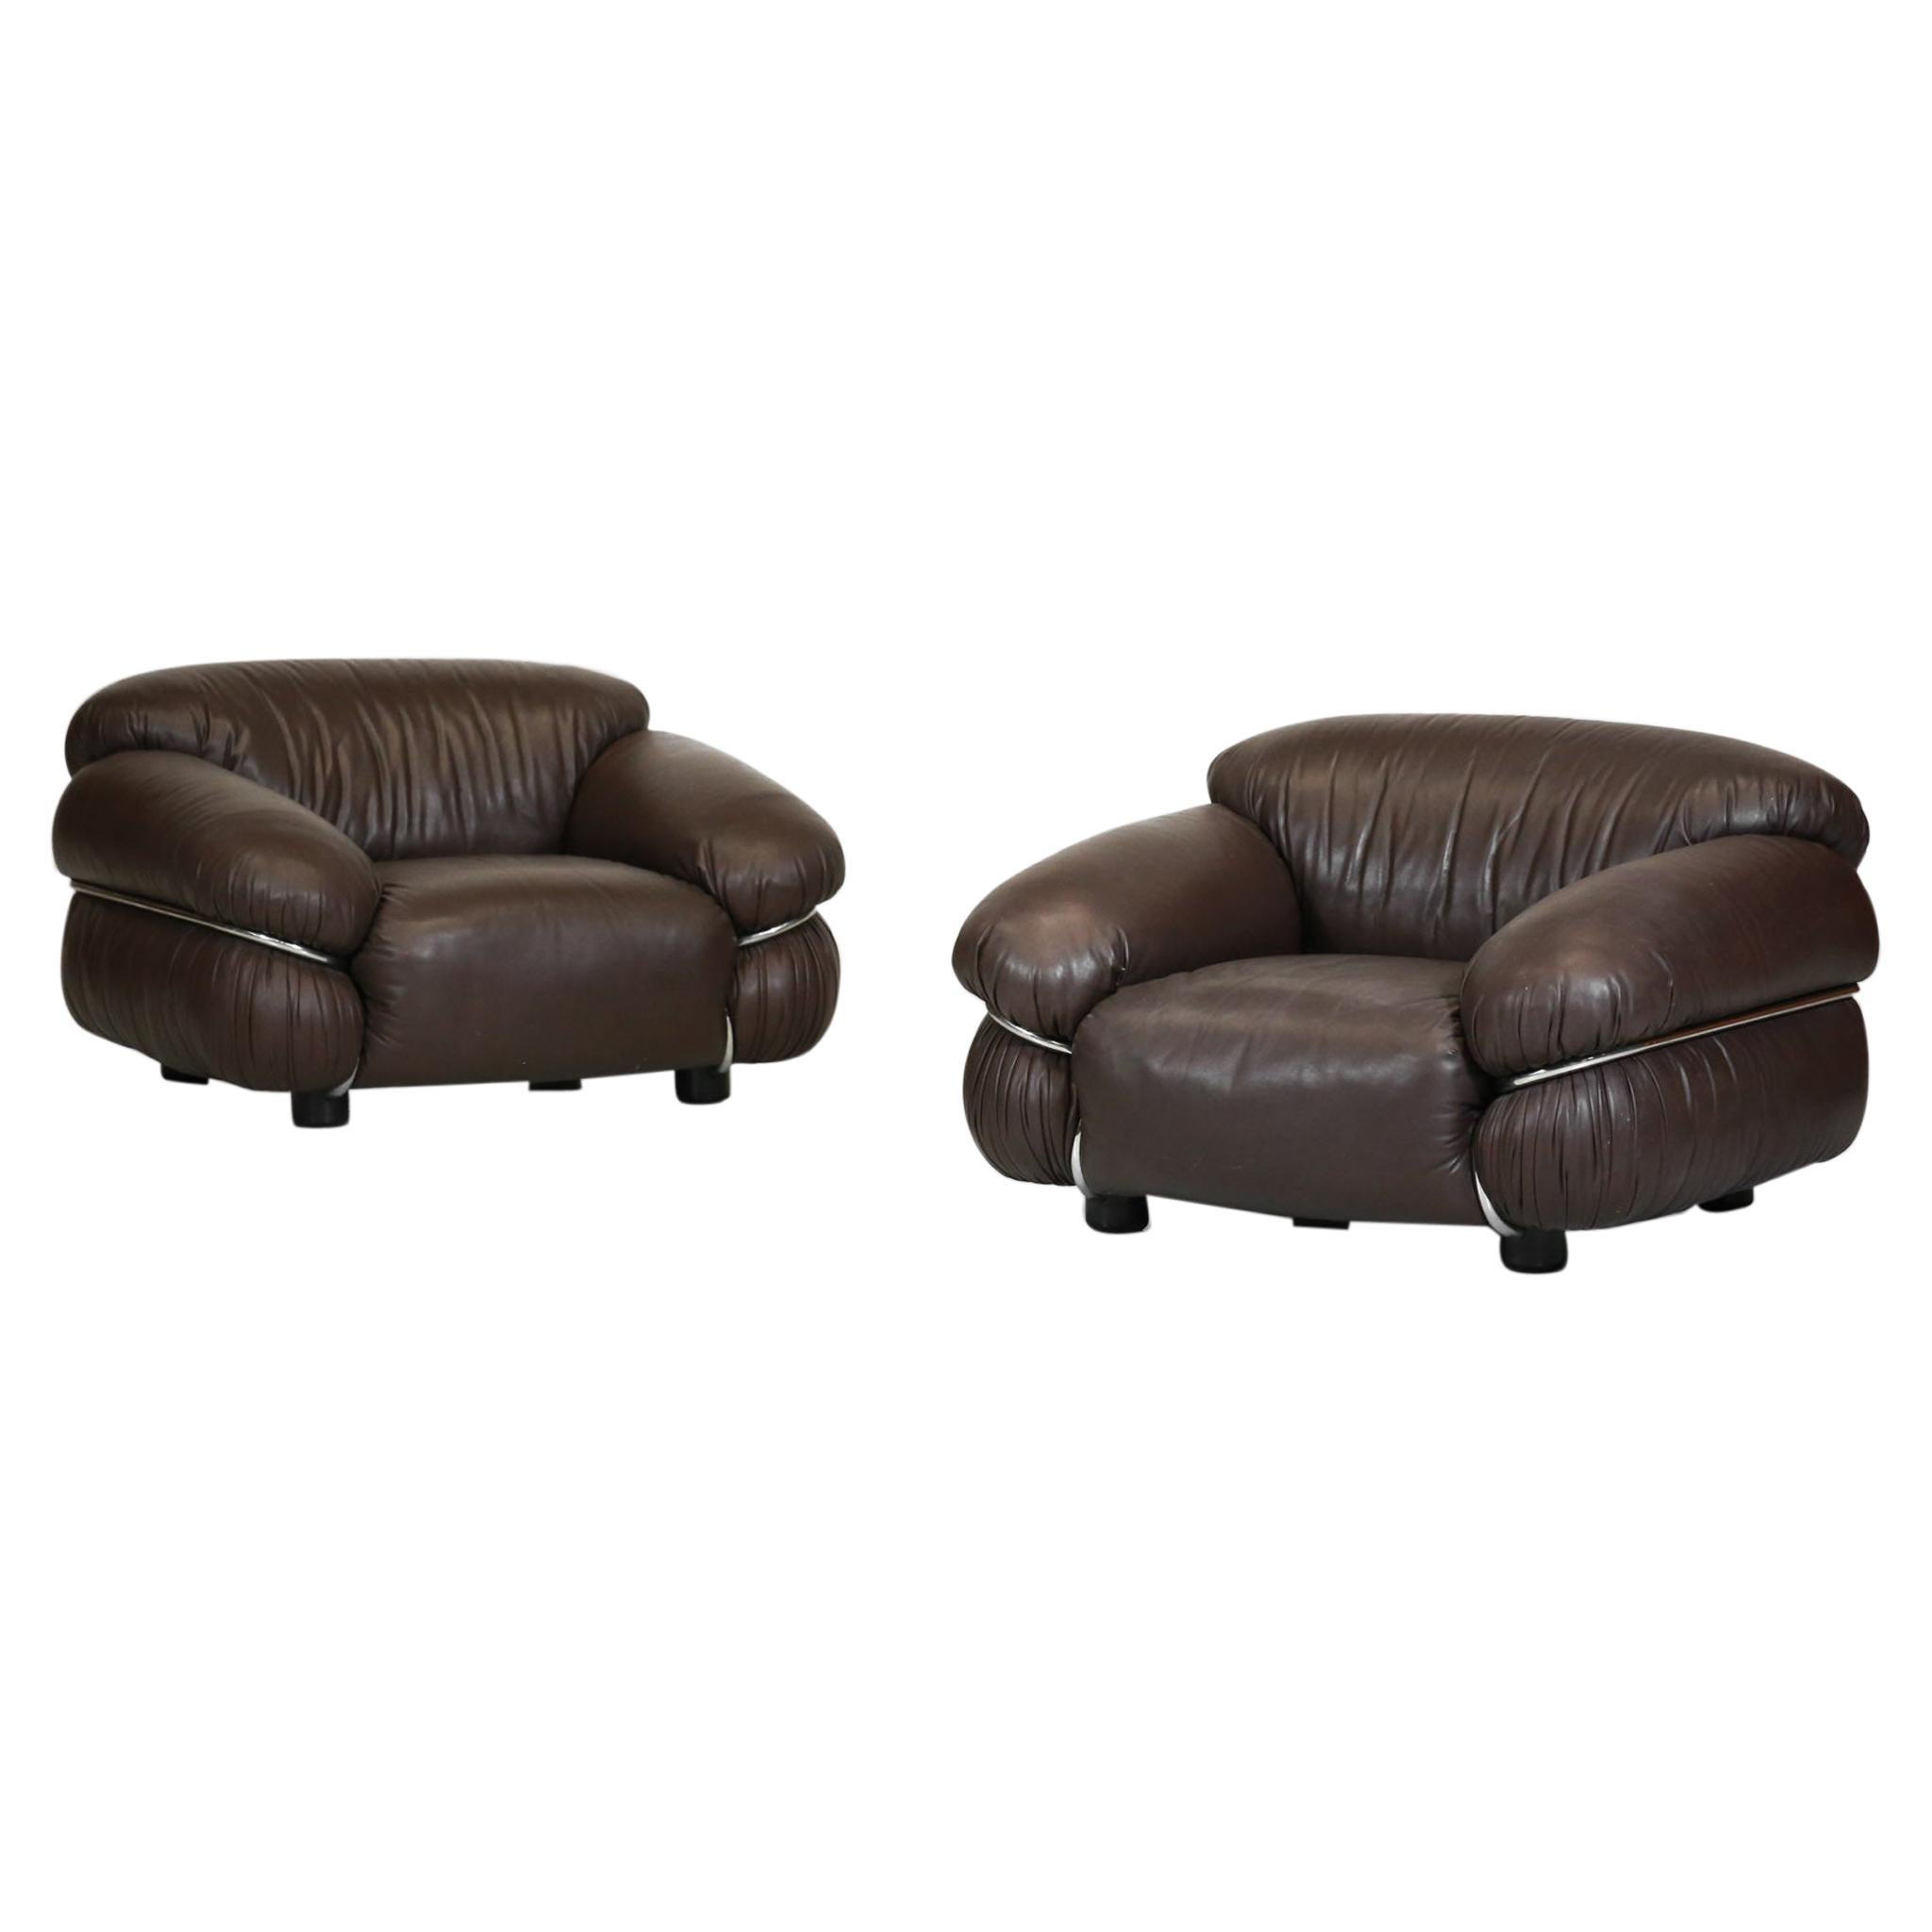 Pair of Sesann Armchairs by Gianfranco Fratinni in Leather for Cassina Italian For Sale